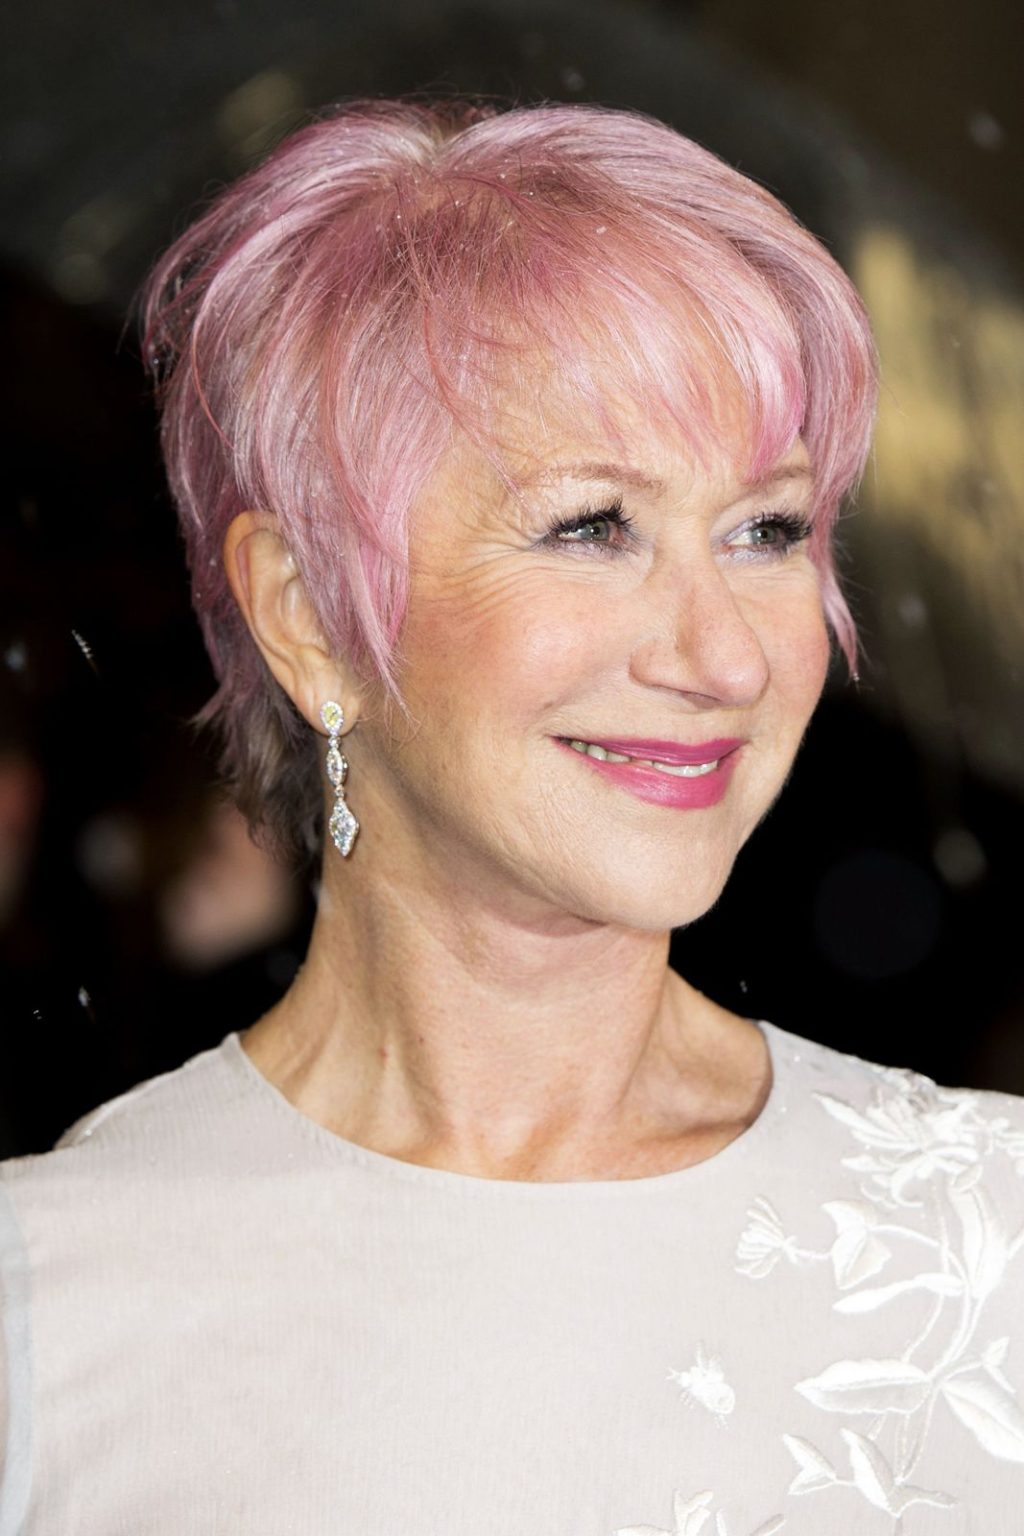 Best 12 Hairstyles for Women Over 60 to Look Younger | Pouted.com